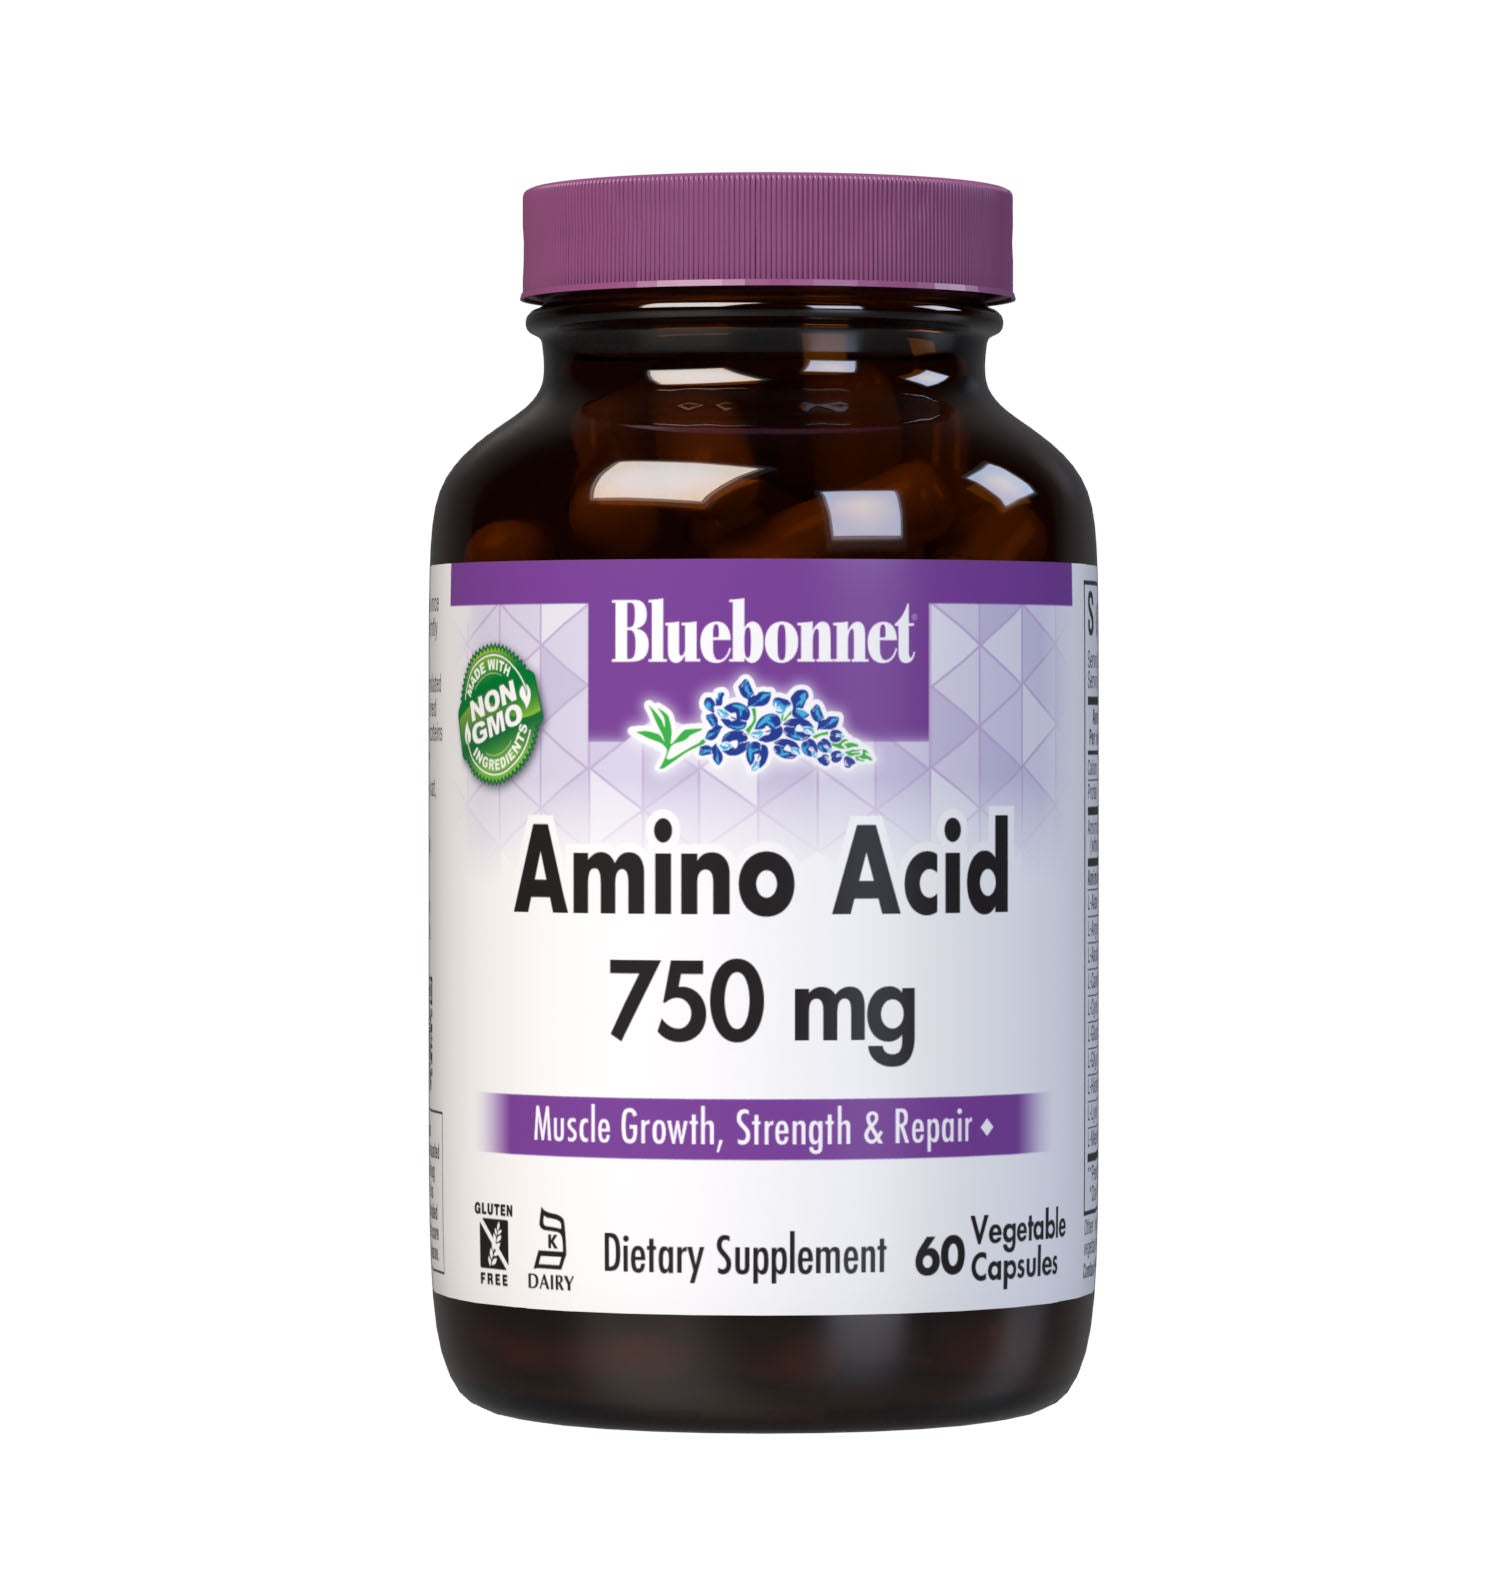 Bluebonnet’s Amino Acid 60 Vegetable Capsules are formulated with amino acids and dipeptide bonded amino acids derived entirely from whey lactalbumin and egg white albumin proteins for muscle growth, strength and repair. #size_60 count